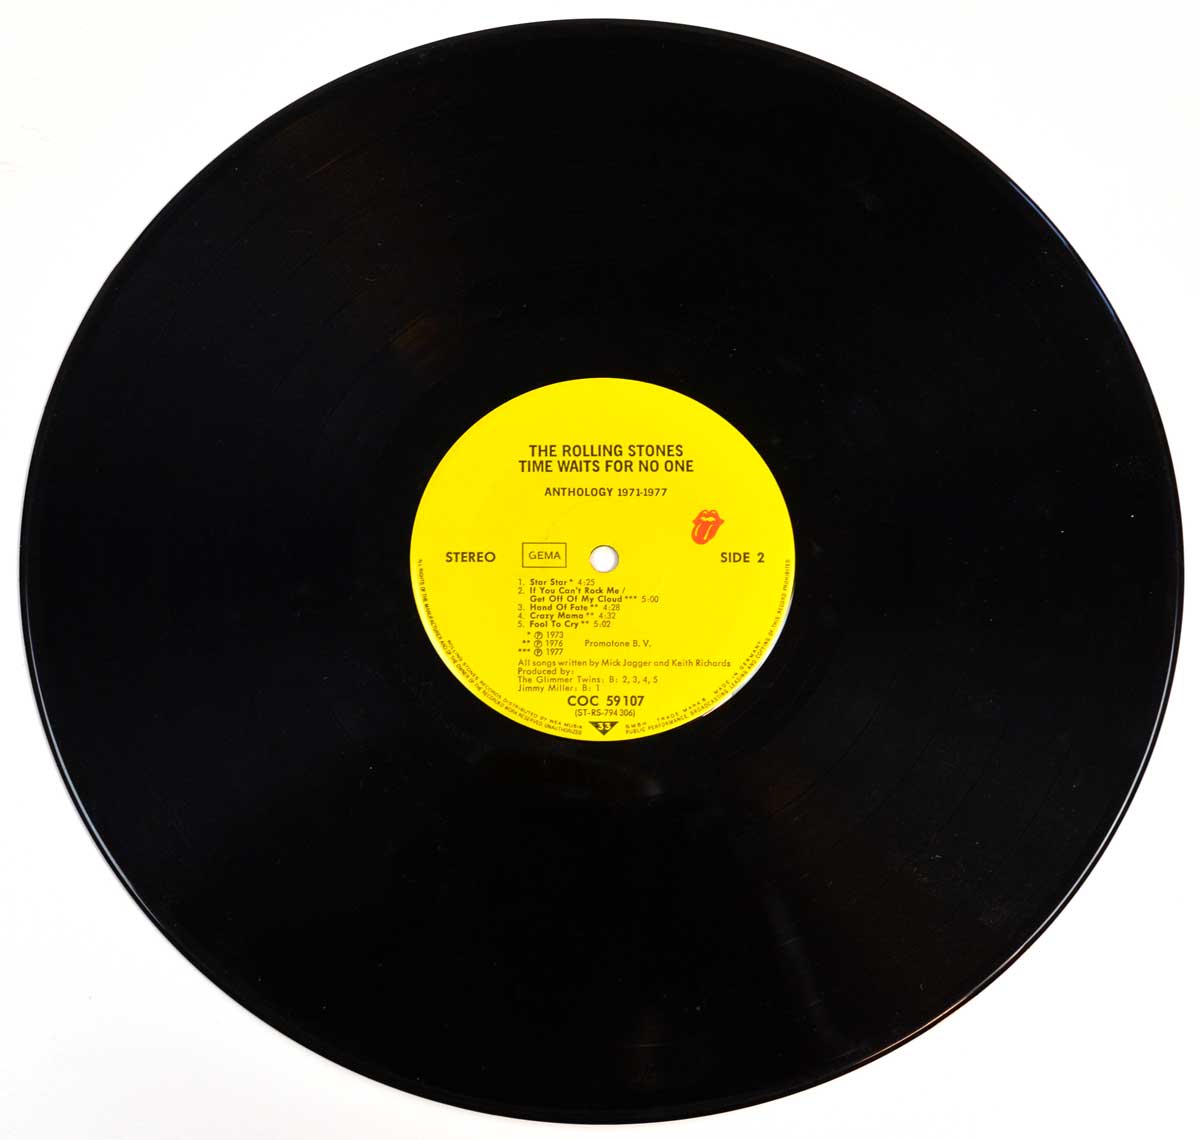 Photo of "ROLLING STONES Time Waits For No One (Anthology 1971-1977)" 12" LP Record - Side Two: